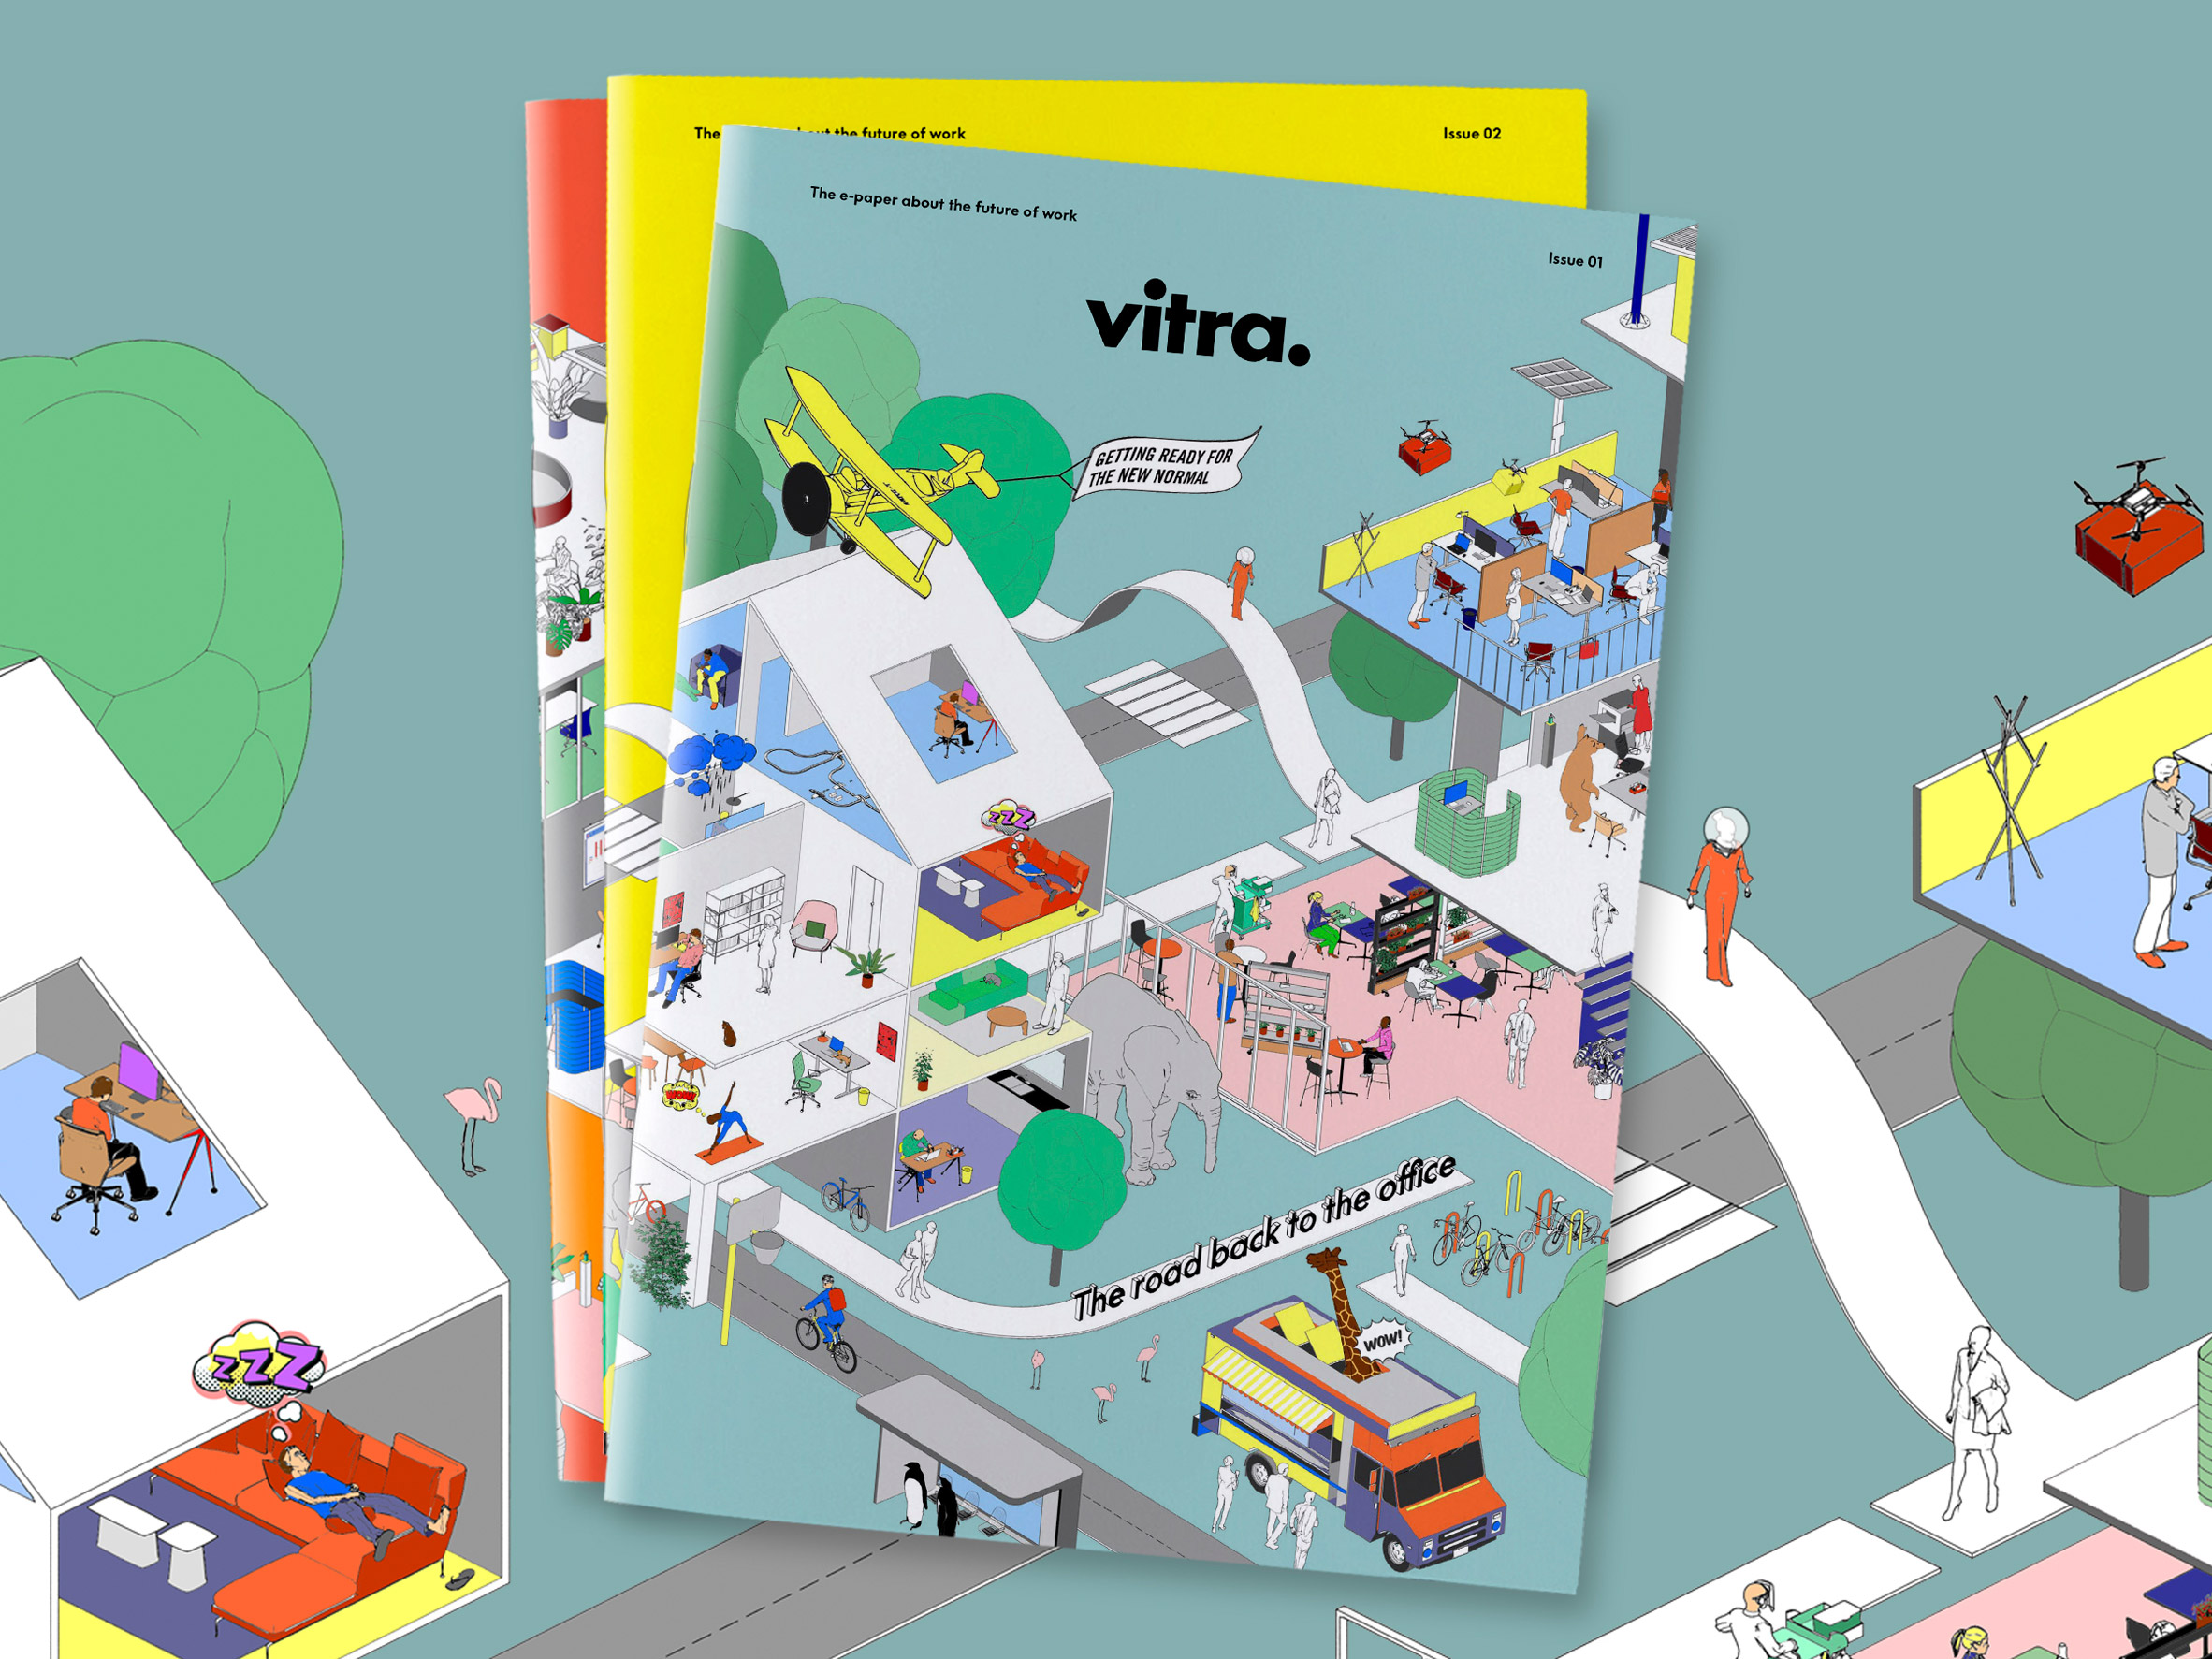 The Road Back to the Office research papers published by furniture brand Vitra